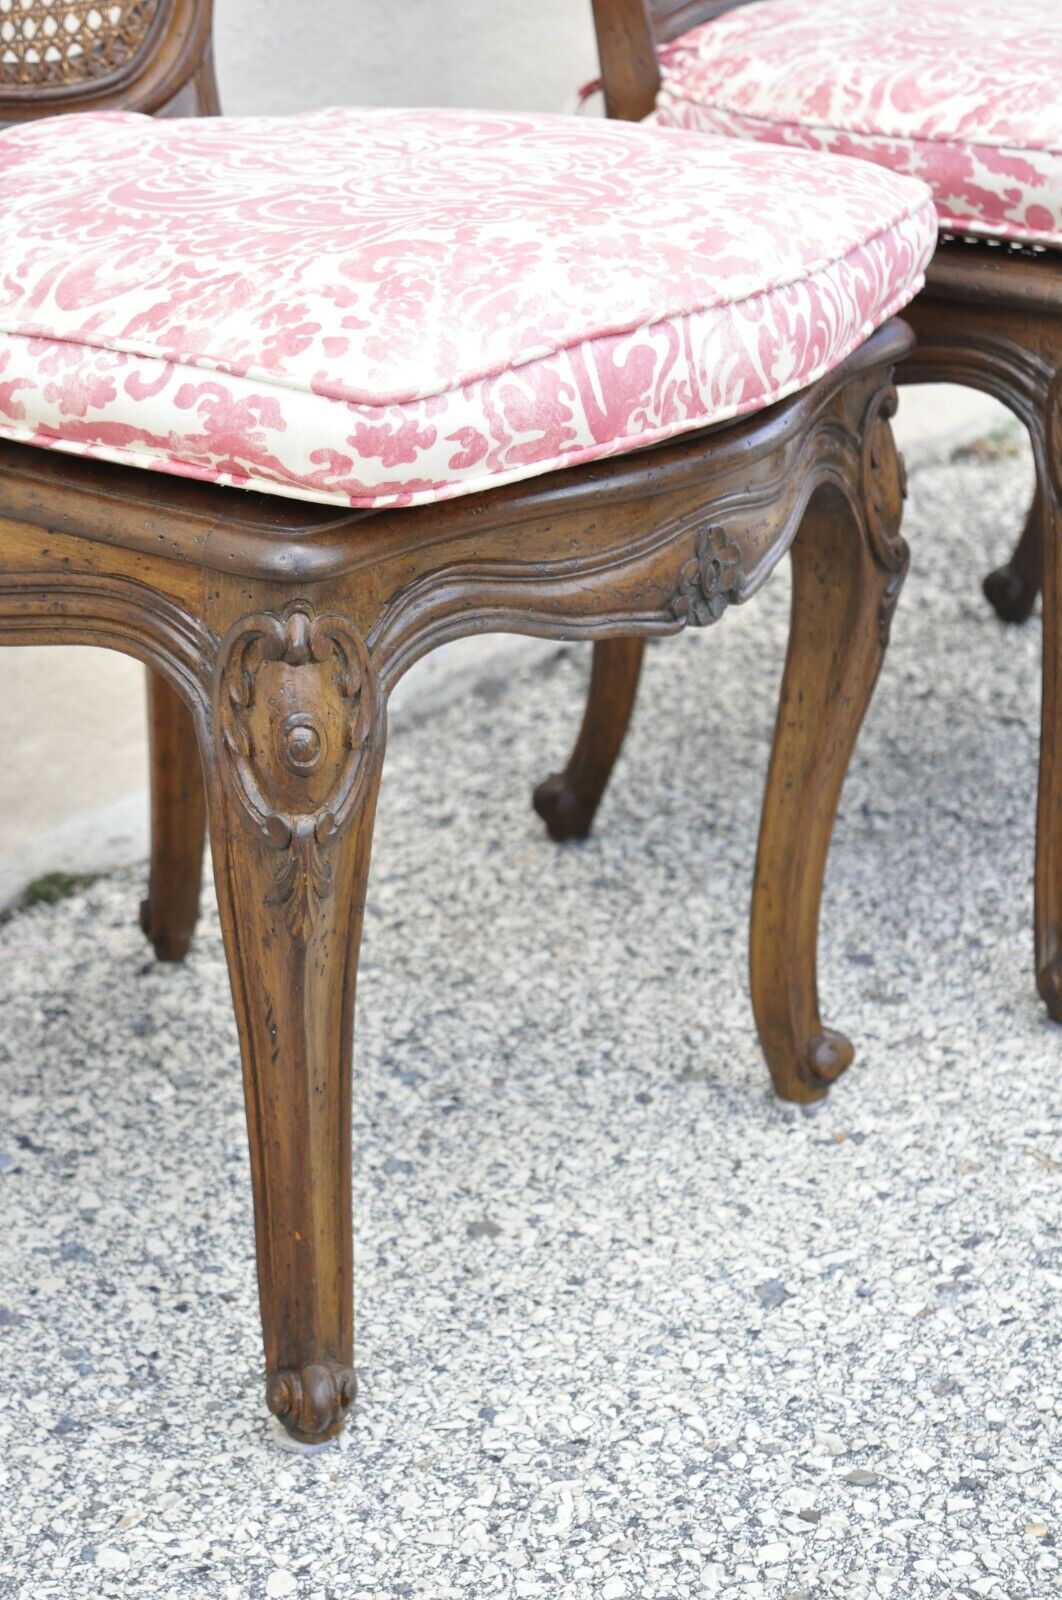 Vintage French Provincial Louis XV Walnut Cane Dining Side Chairs - Set of 6